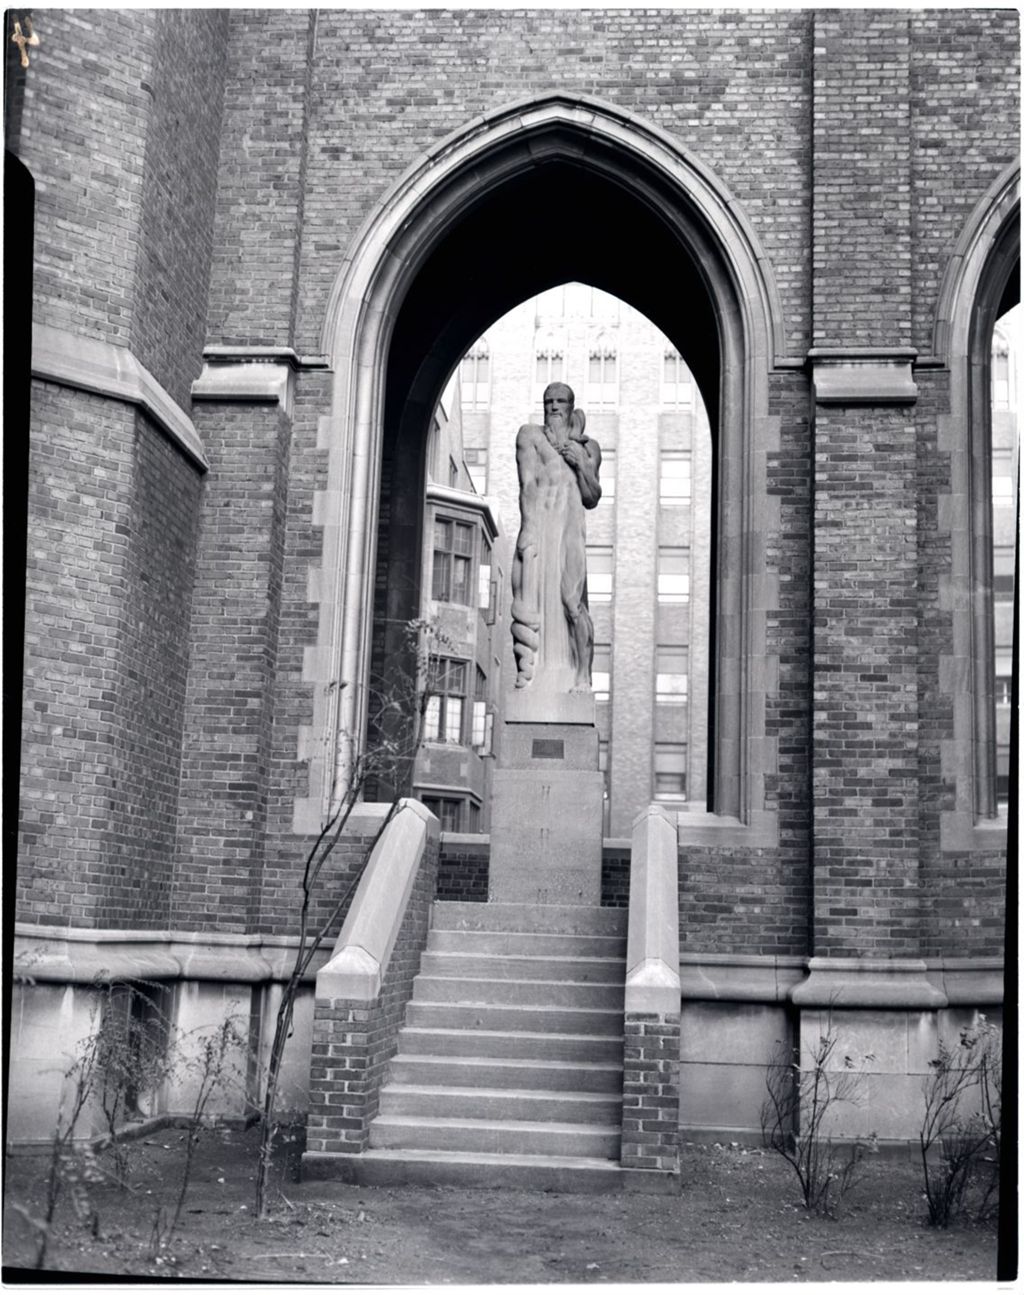 Miniature of Statue in Arched Walkway, University of Illinois Medical School